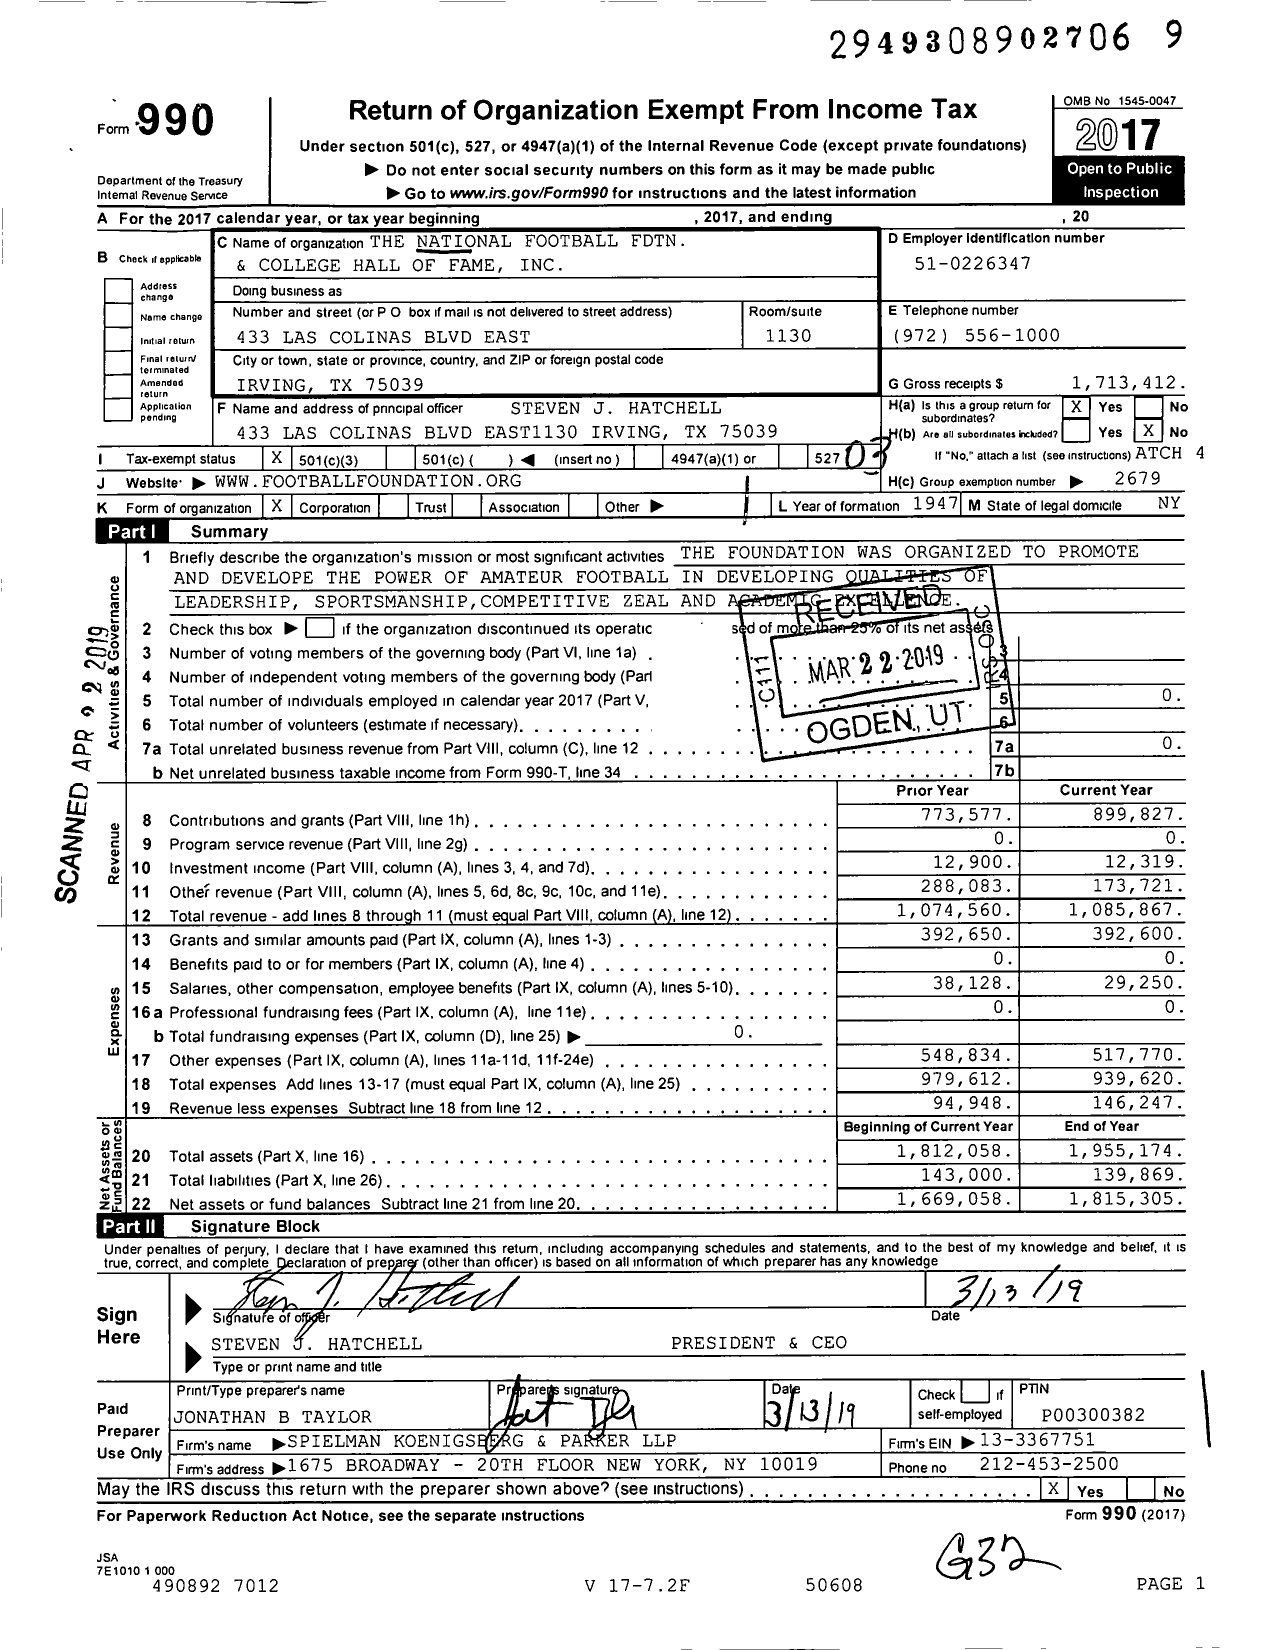 Image of first page of 2017 Form 990 for The National Football Fdtn and College Hall Of Fame